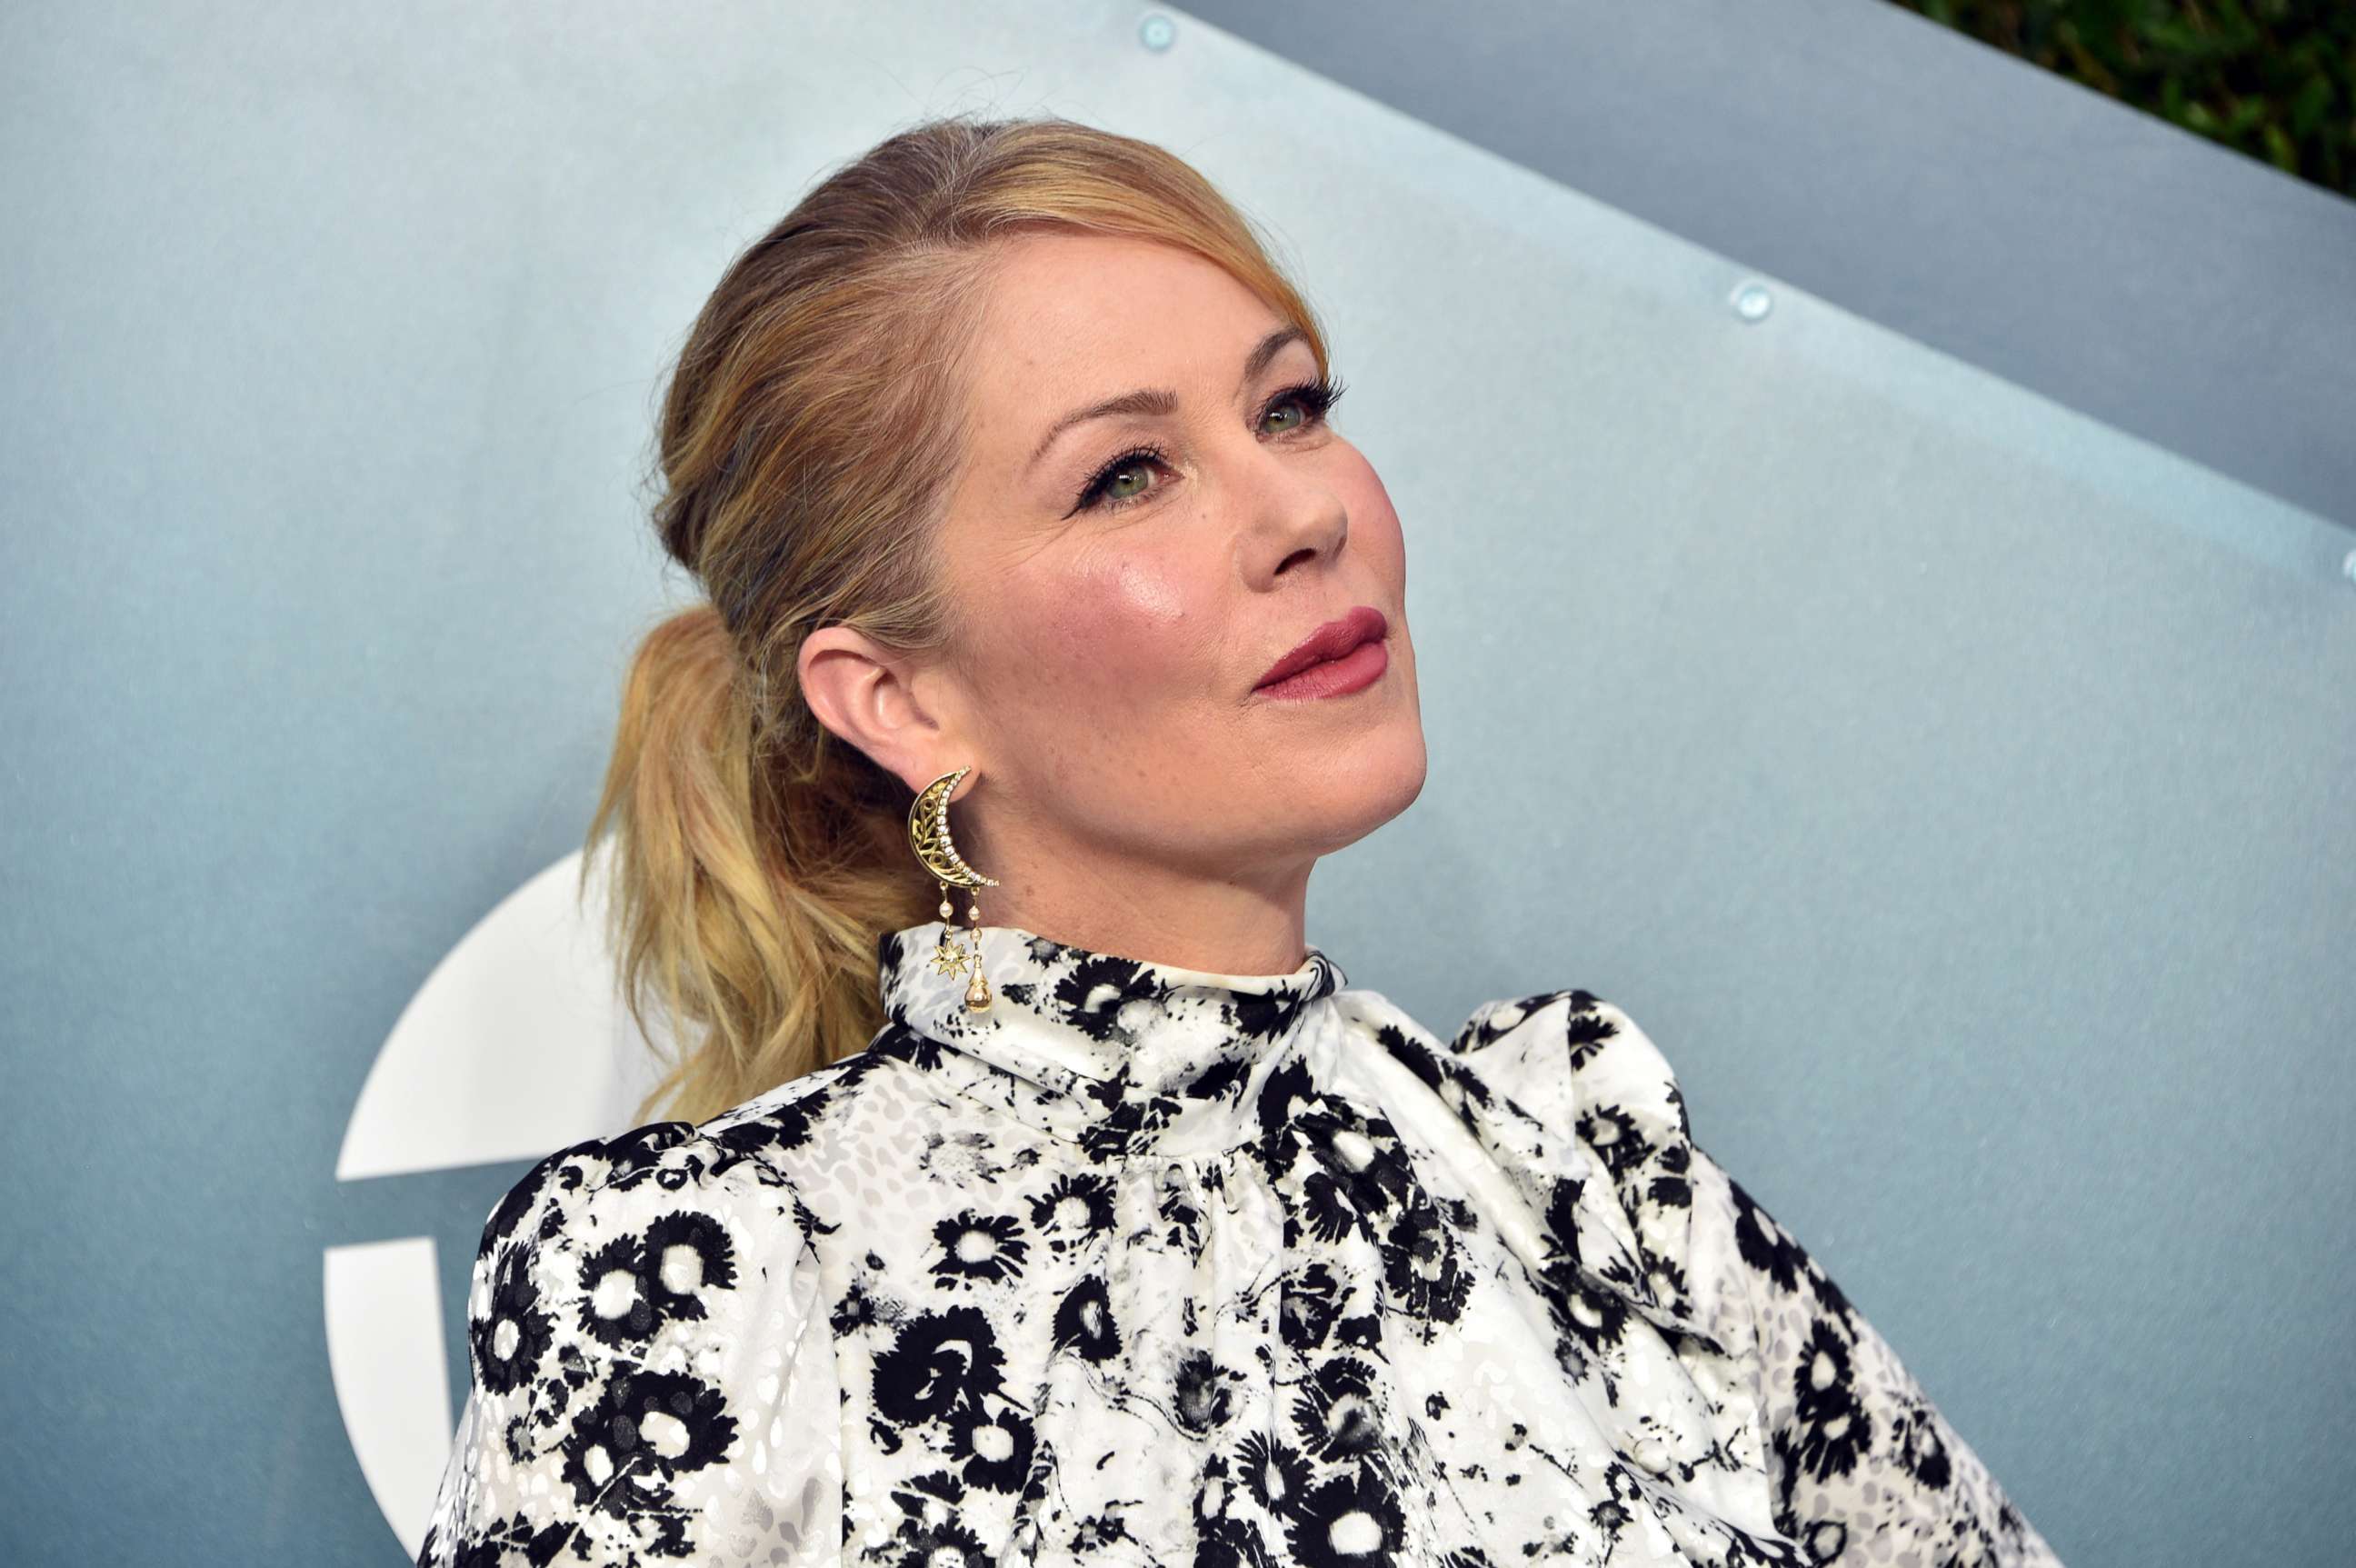 PHOTO: Christina Applegate attends the 26th Annual Screen Actors Guild Awards at The Shrine Auditorium on January 19, 2020 in Los Angeles.